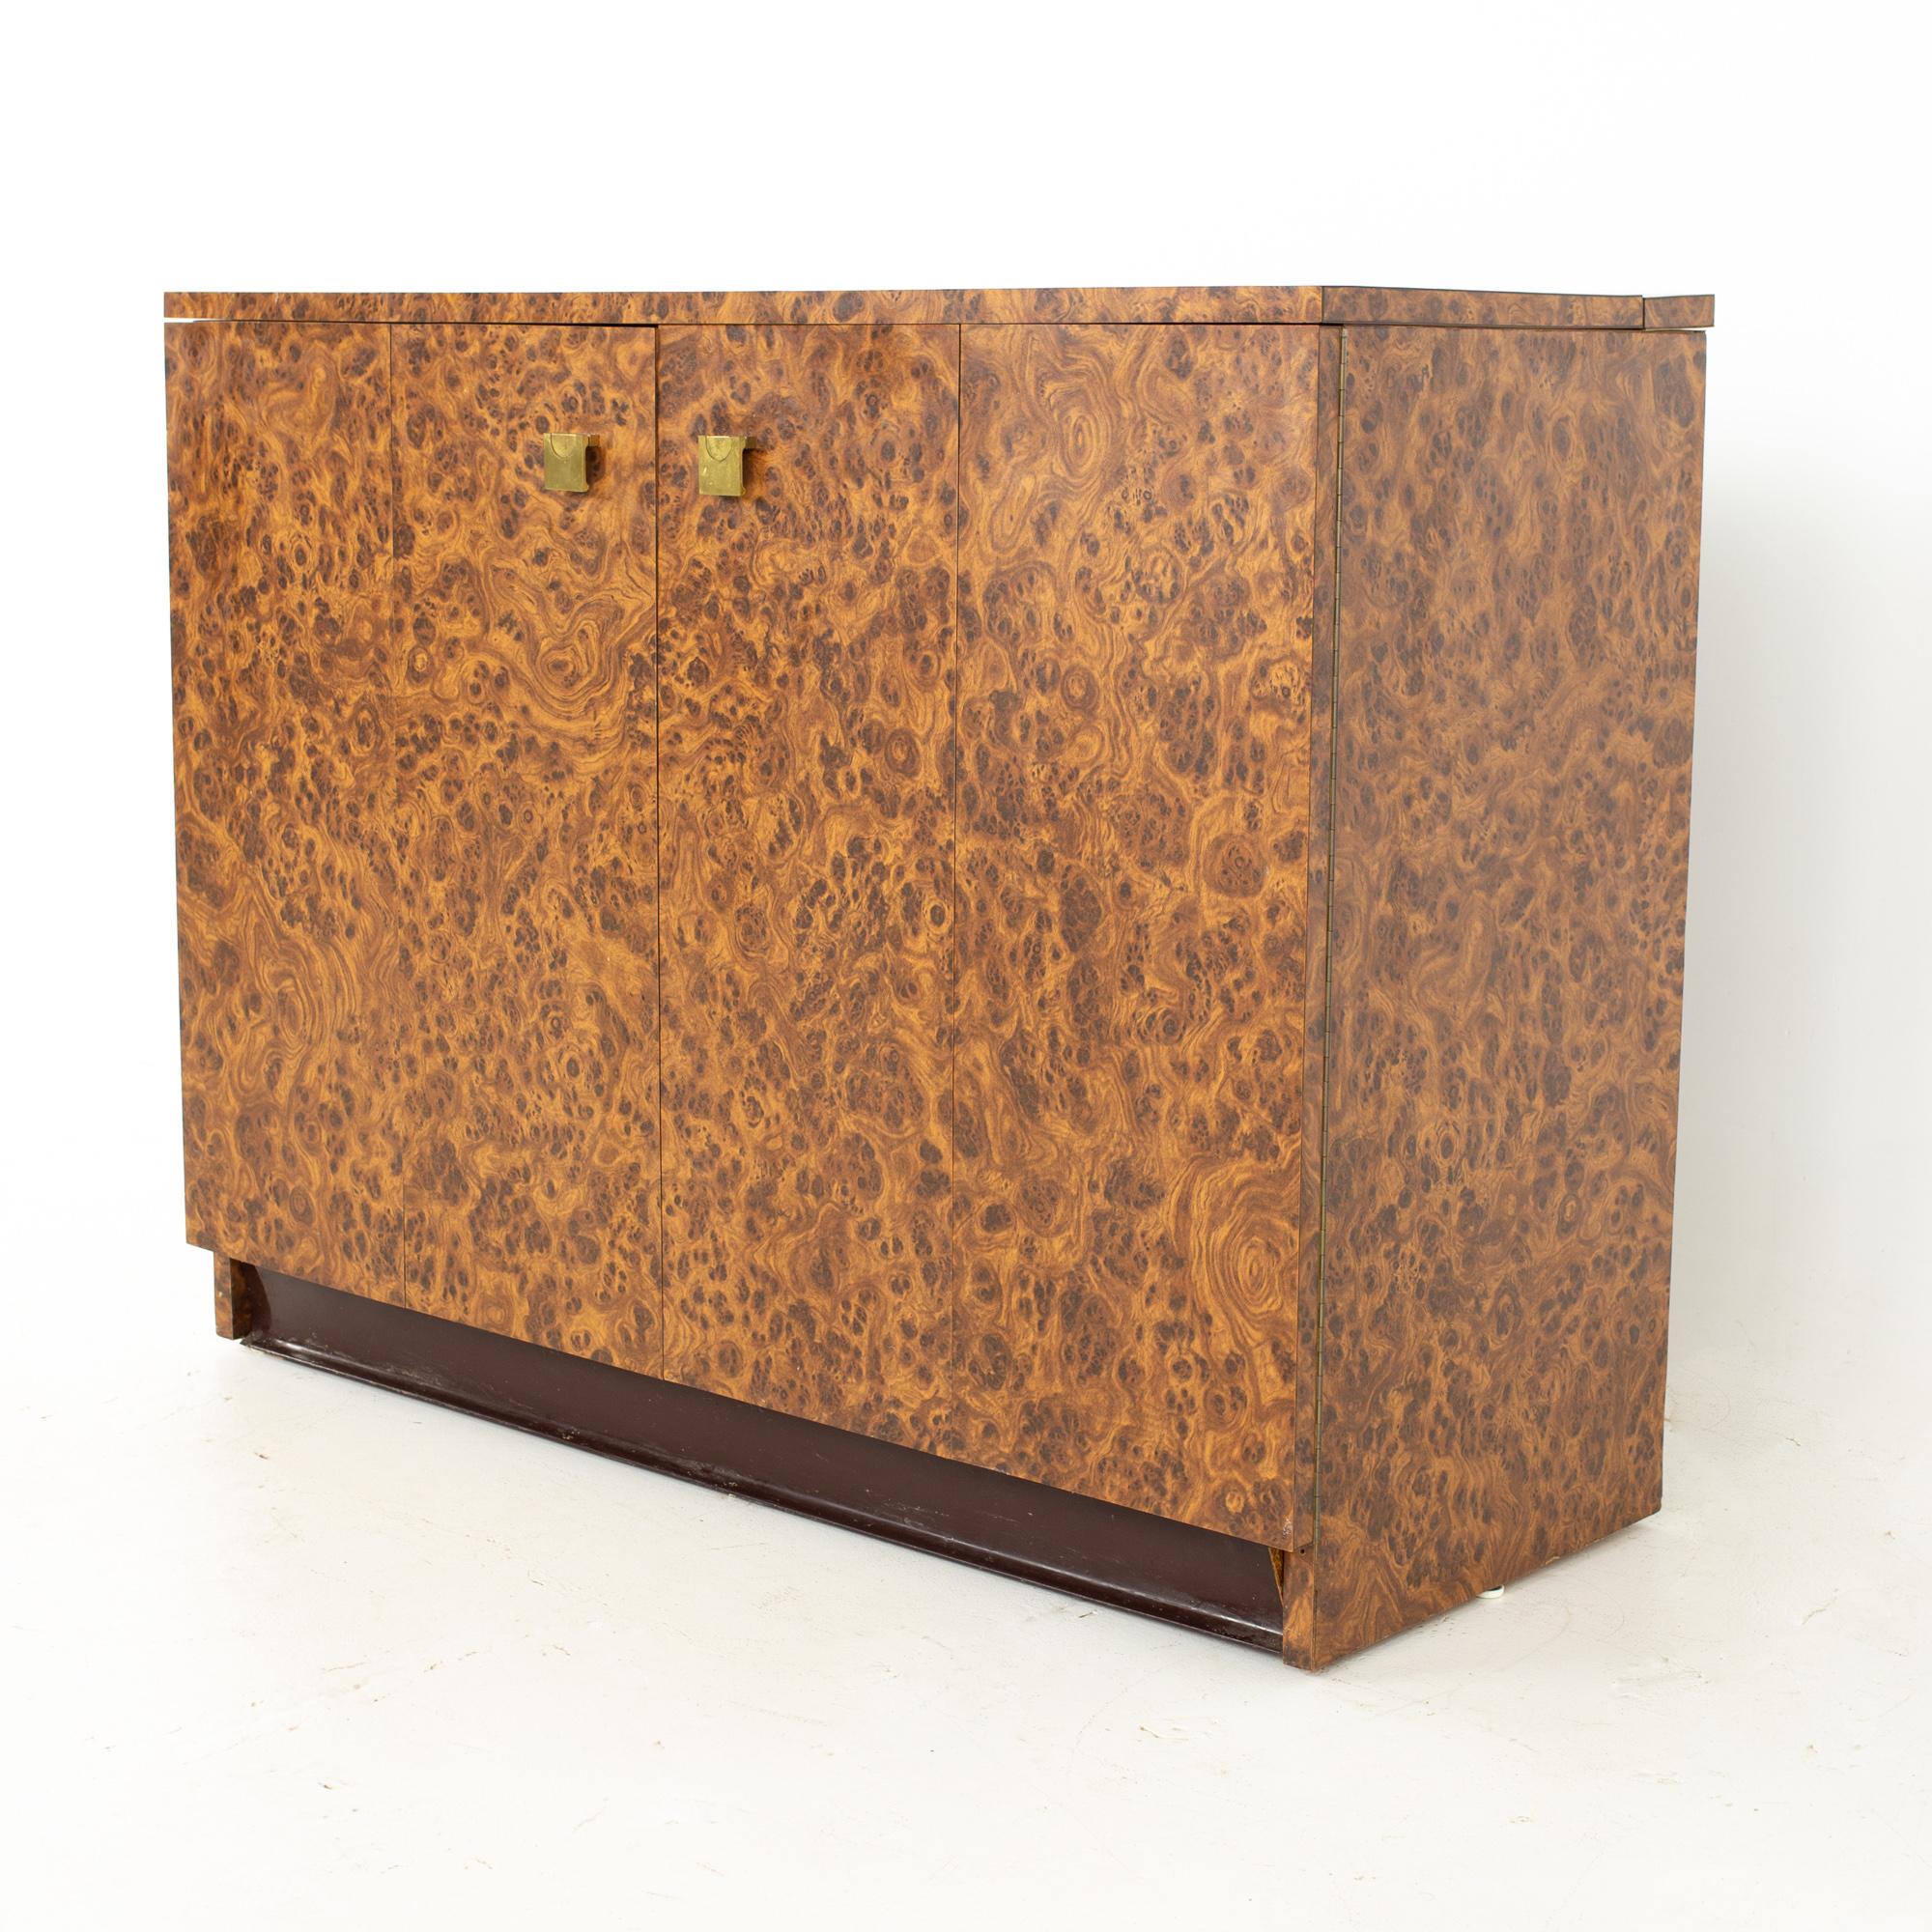 Mid century burlwood laminate and brass bar record credenza.
Credenza measures: 42.75 wide x 17.5 deep x 33 inches high

All pieces of furniture can be had in what we call restored vintage condition. That means the piece is restored upon purchase